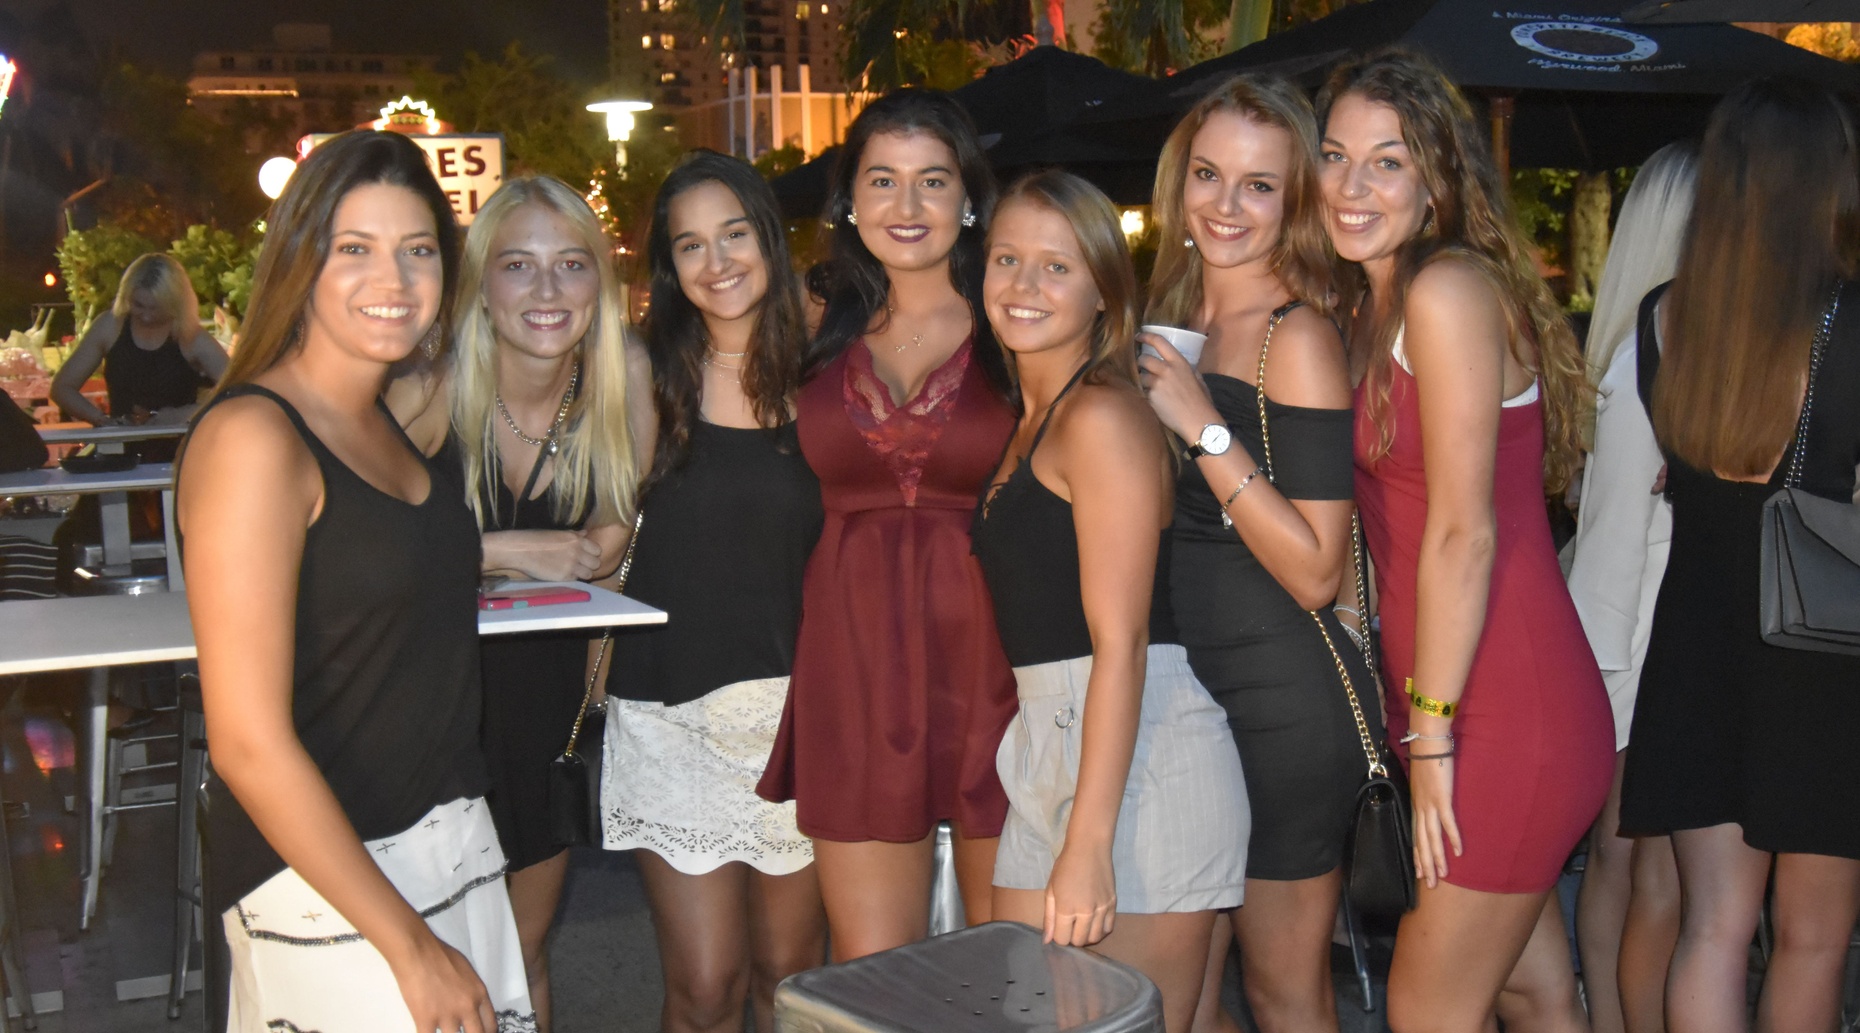 Miami: Party Bus, Club Entry, and Open Bar Night Experience